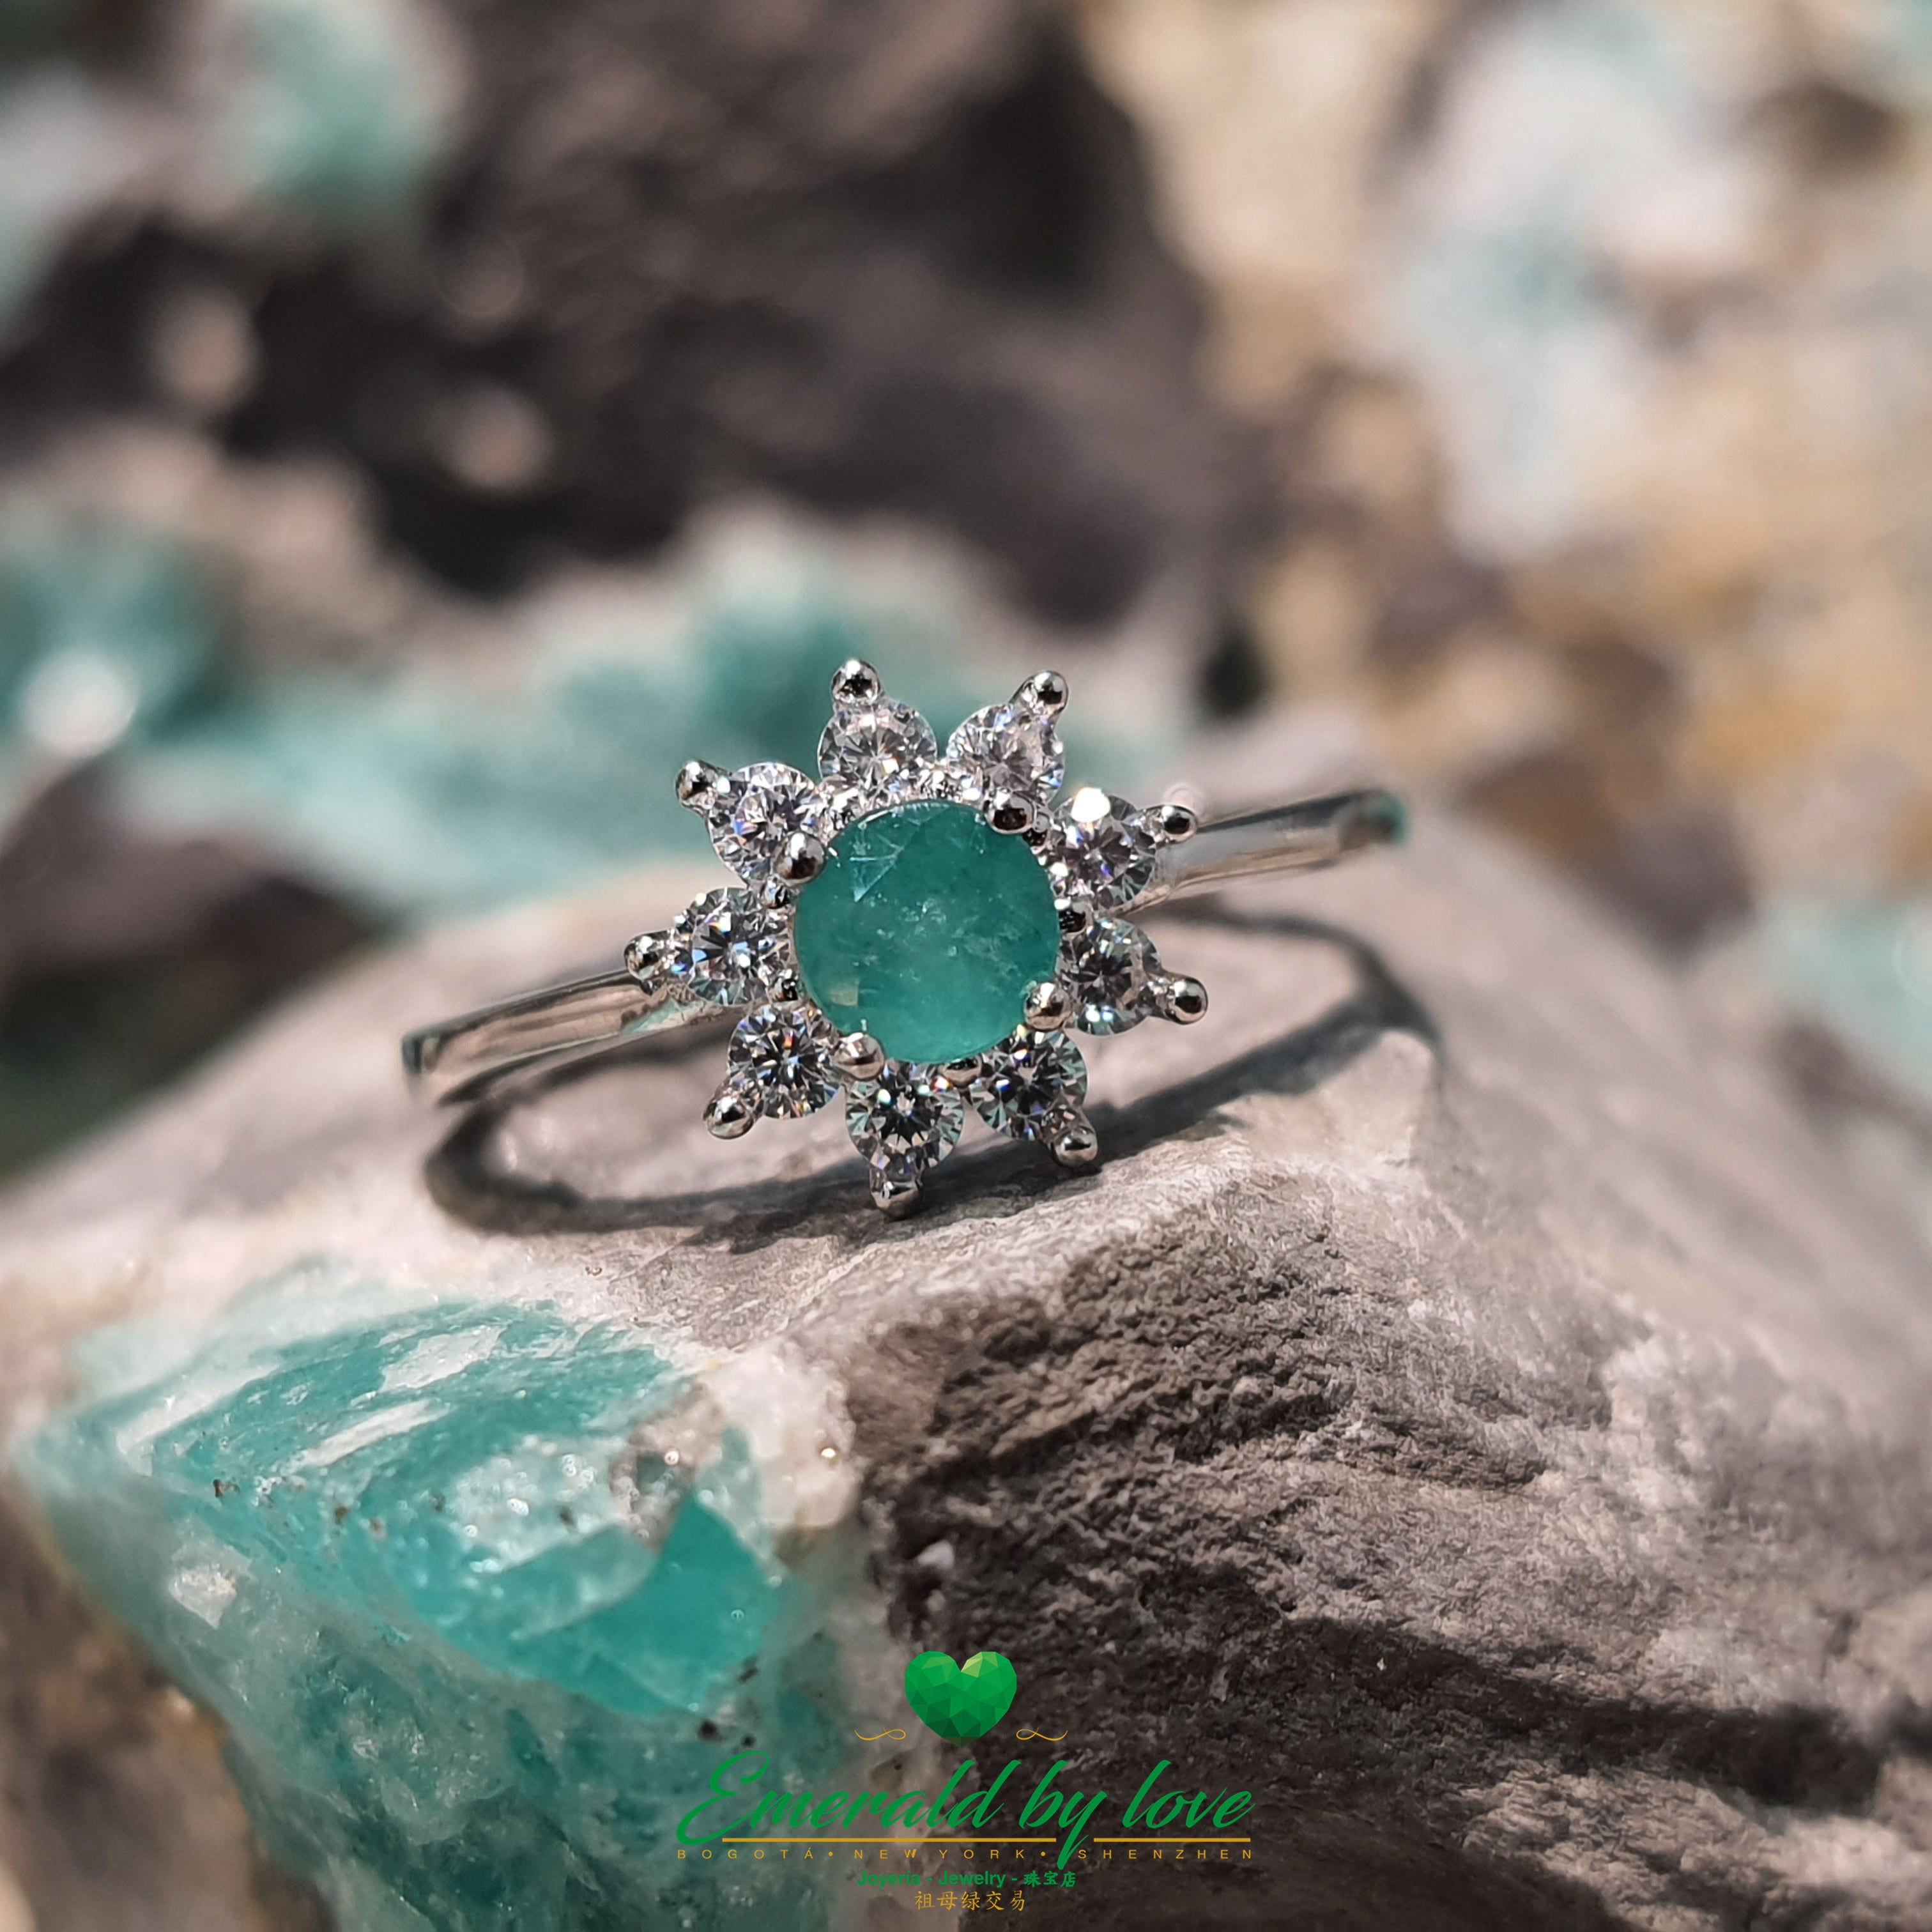 Silver Sunflower Ring with Round Central Emerald: Nature's Radiance